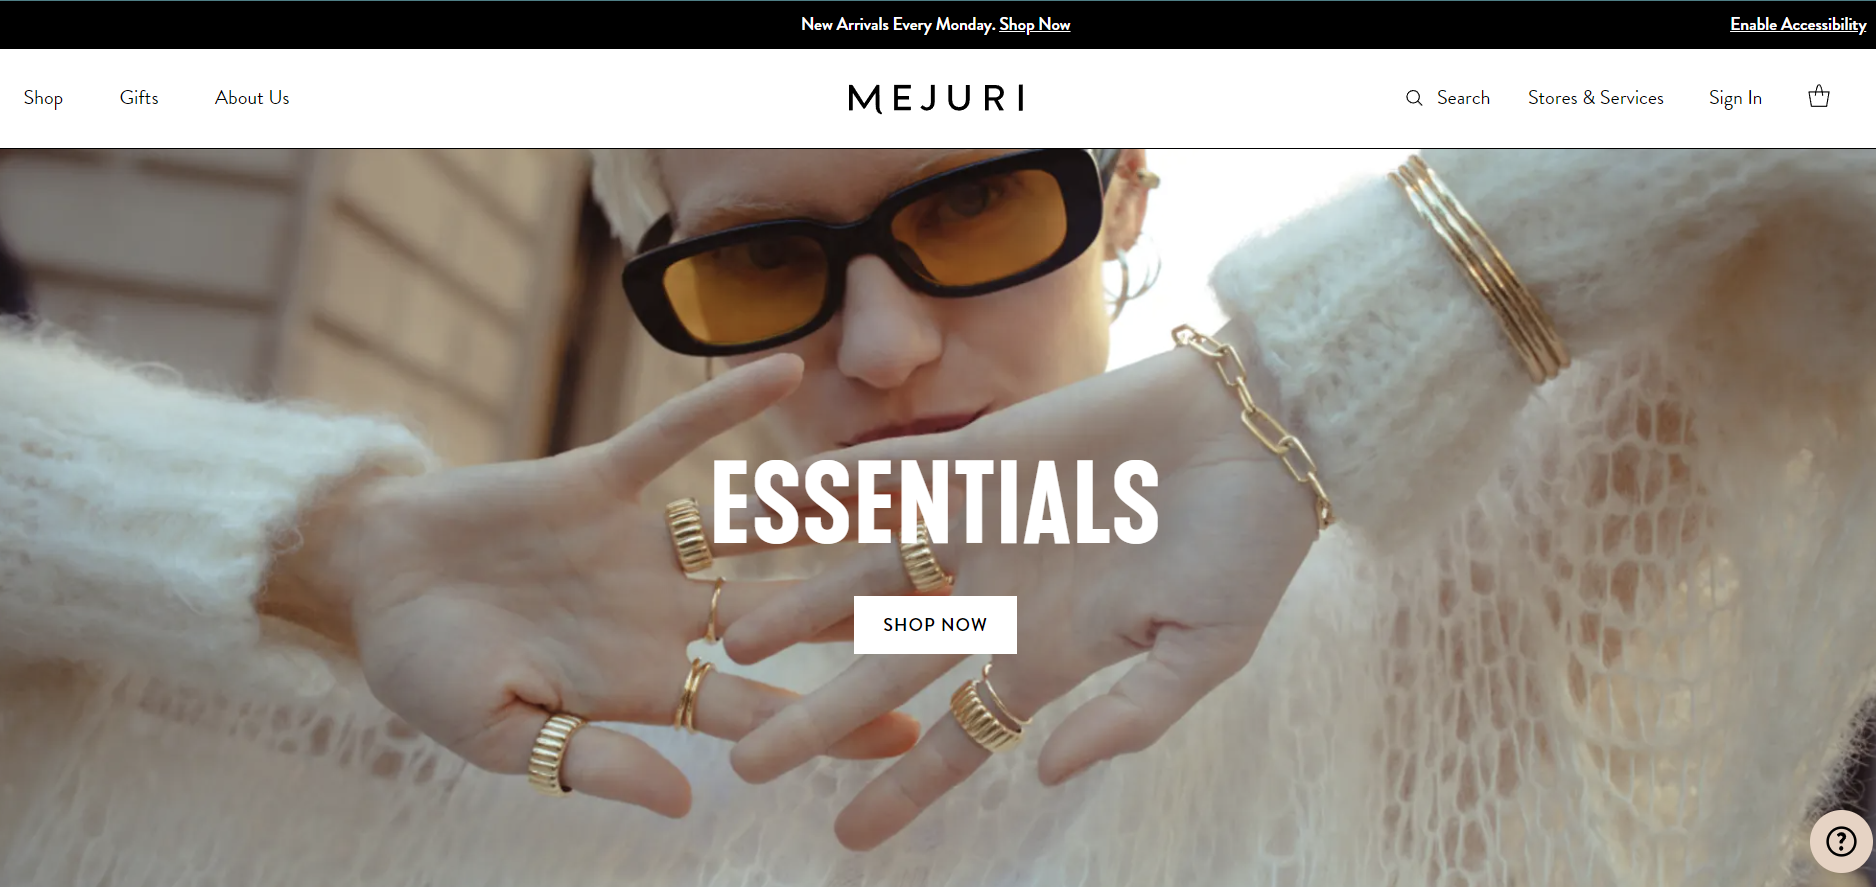 Mejuri affordable Canadian jewelry brands